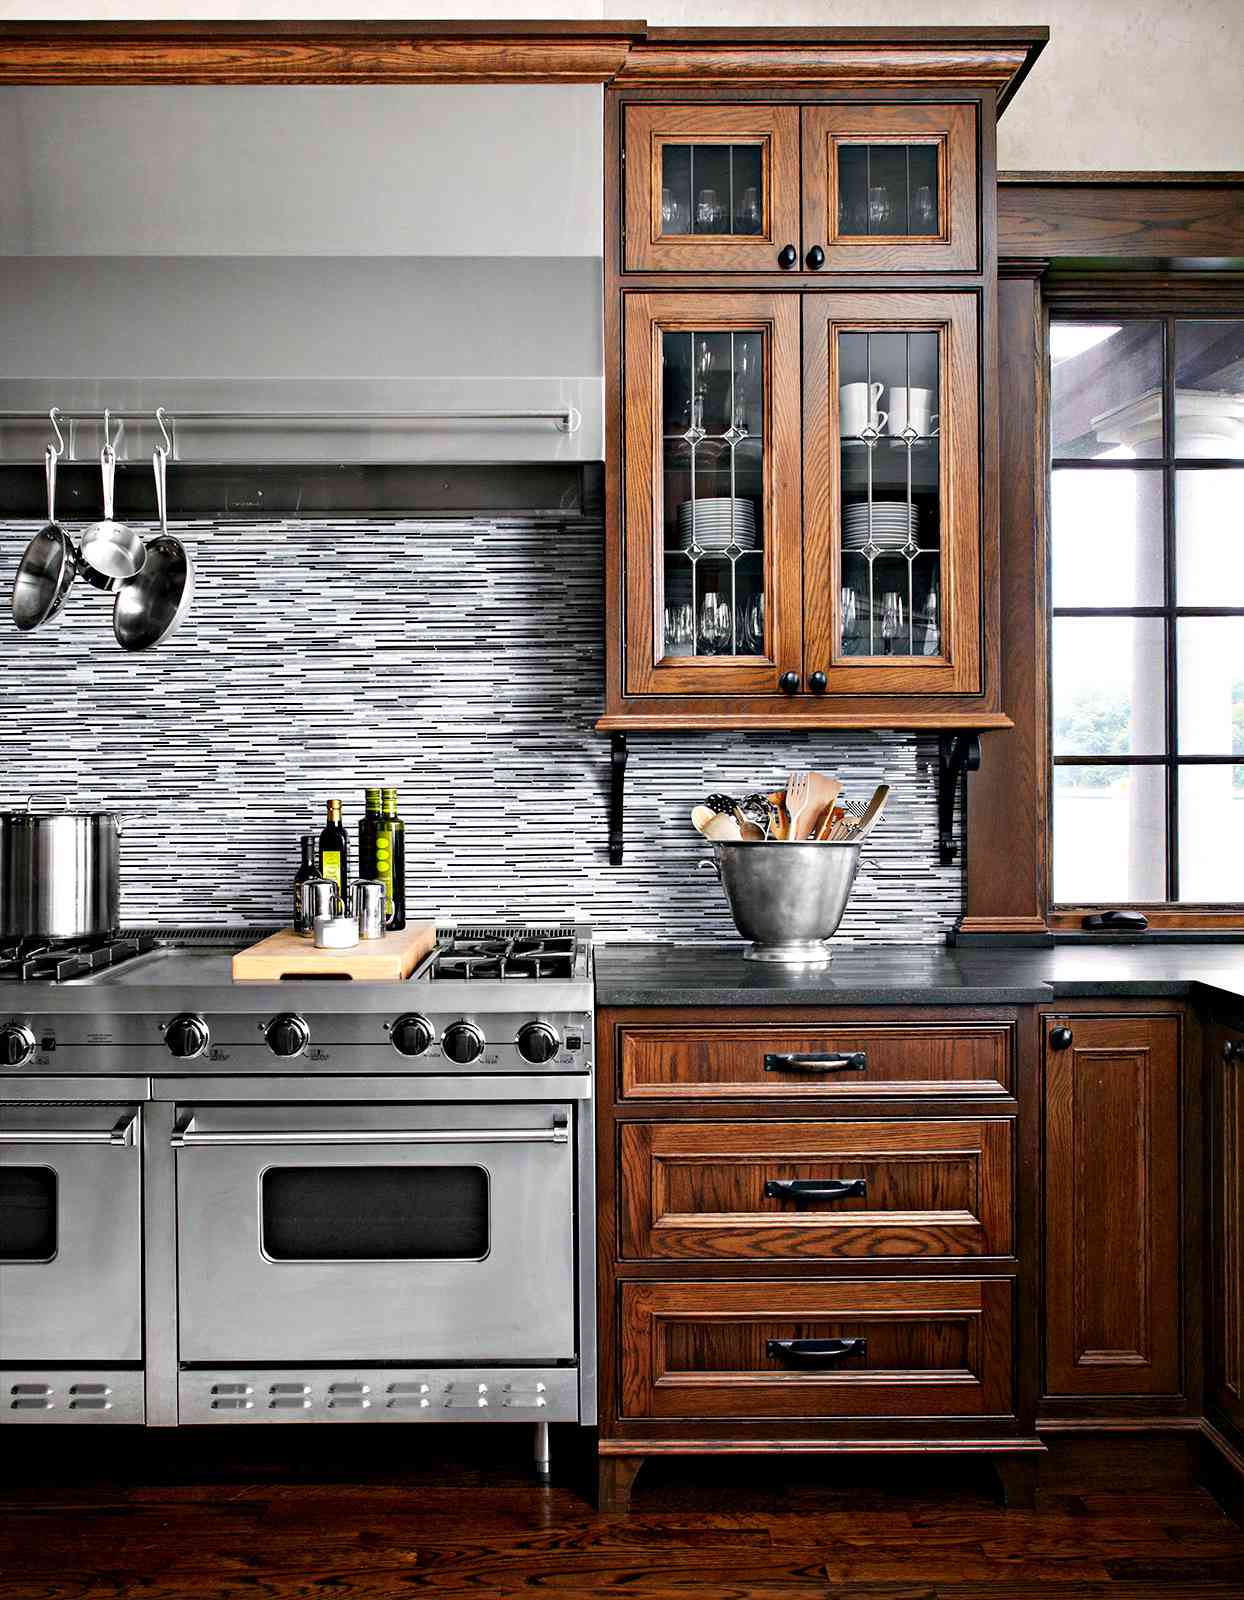 Transitional style kitchen with double oven